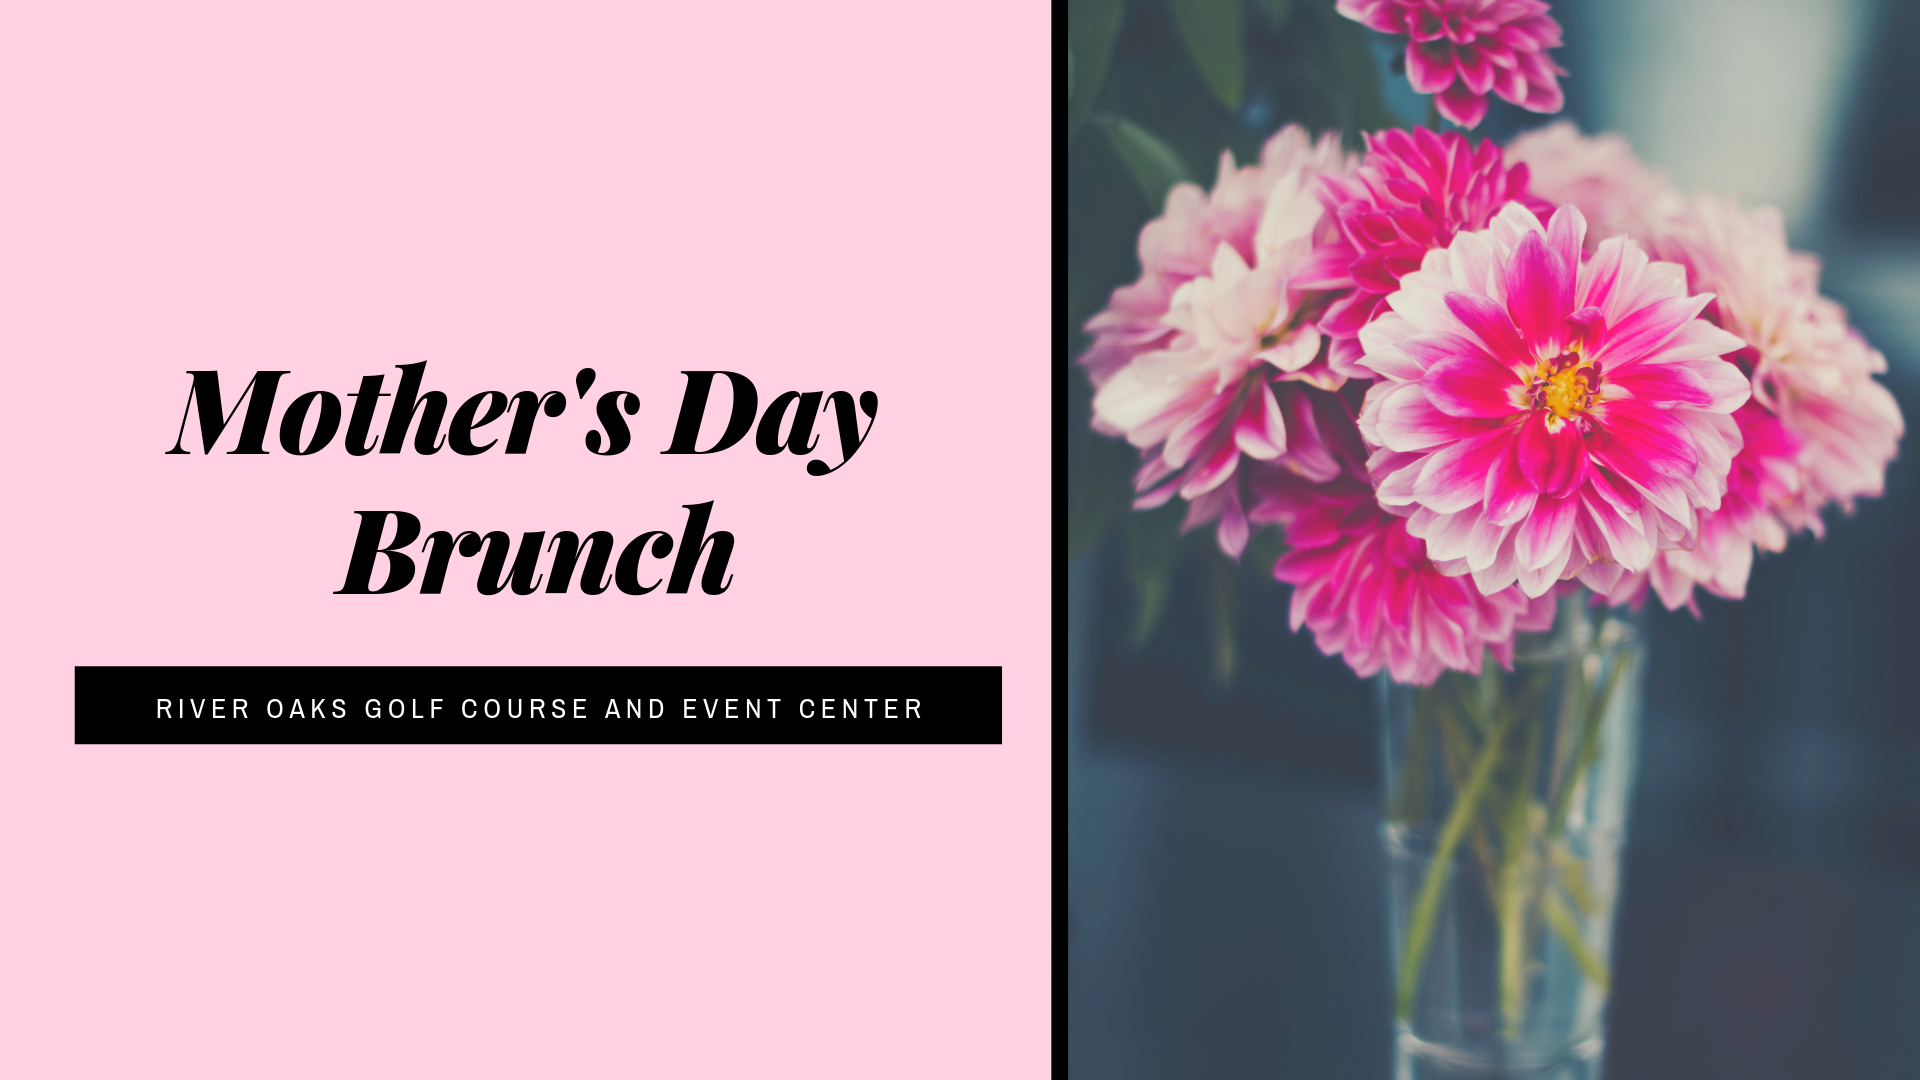 Mother's Day Brunch - River Oaks Golf Course - Cottage Grove